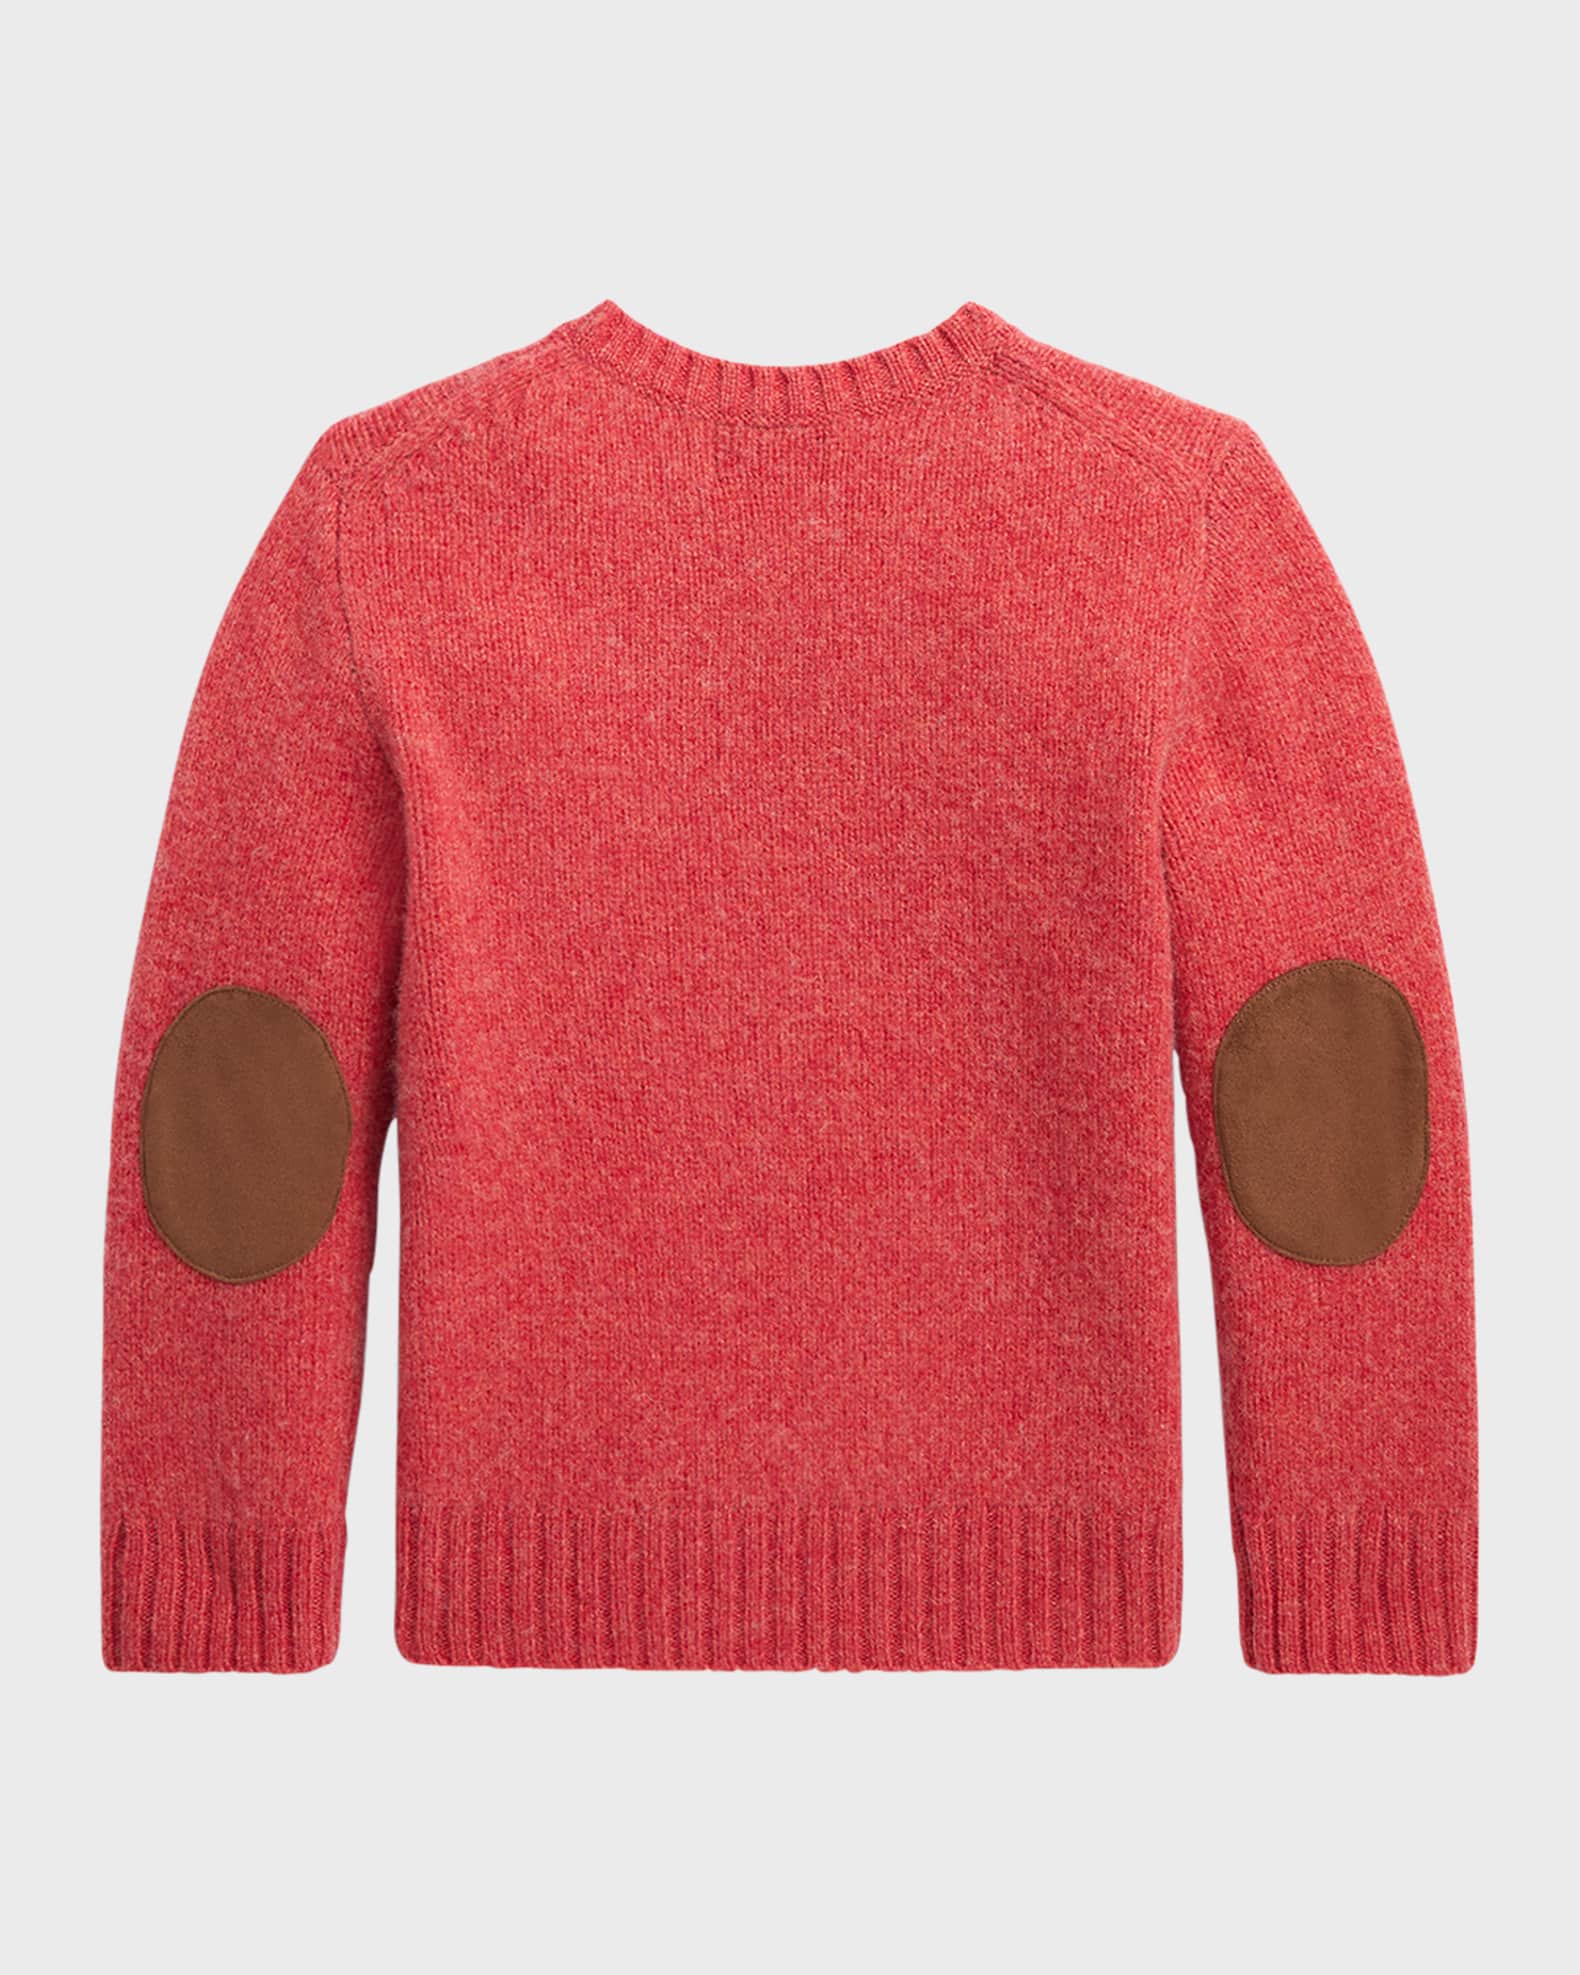 Boys Clothing, Pure Cashmere Wool Sweater